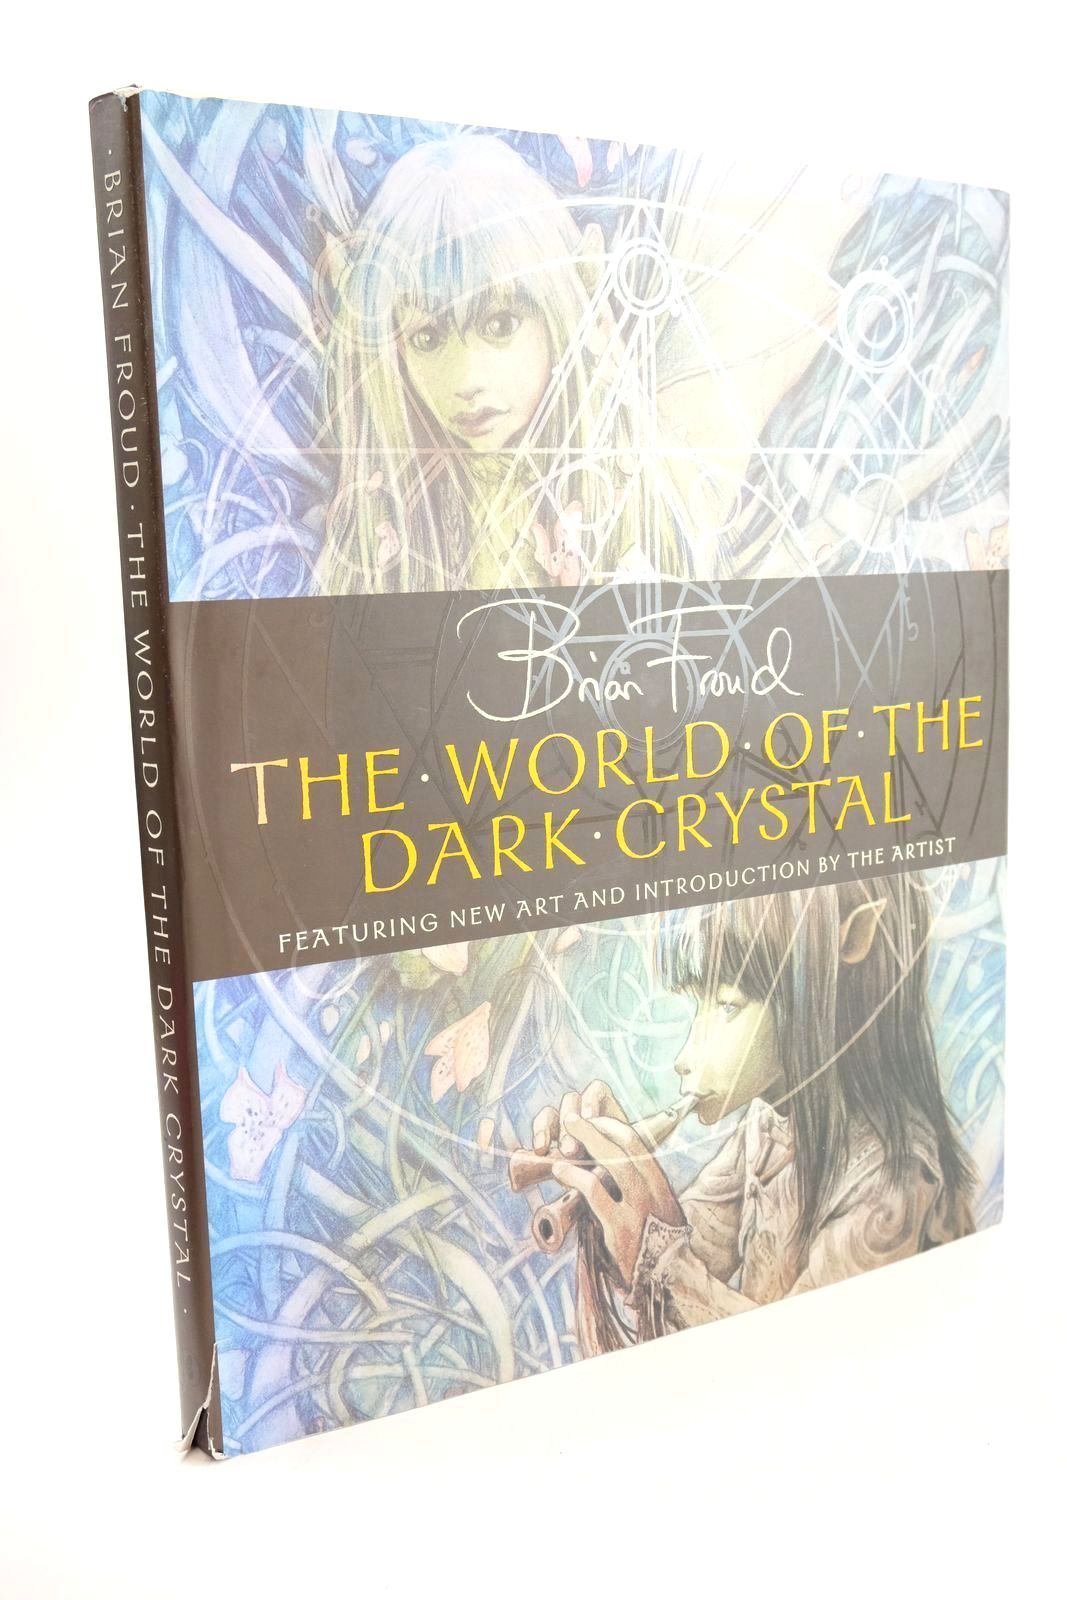 Photo of THE WORLD OF THE DARK CRYSTAL written by Llewellyn, J.J. Henson, Jim Brown, Rupert illustrated by Froud, Brian published by Pavilion Books (STOCK CODE: 1324867)  for sale by Stella & Rose's Books